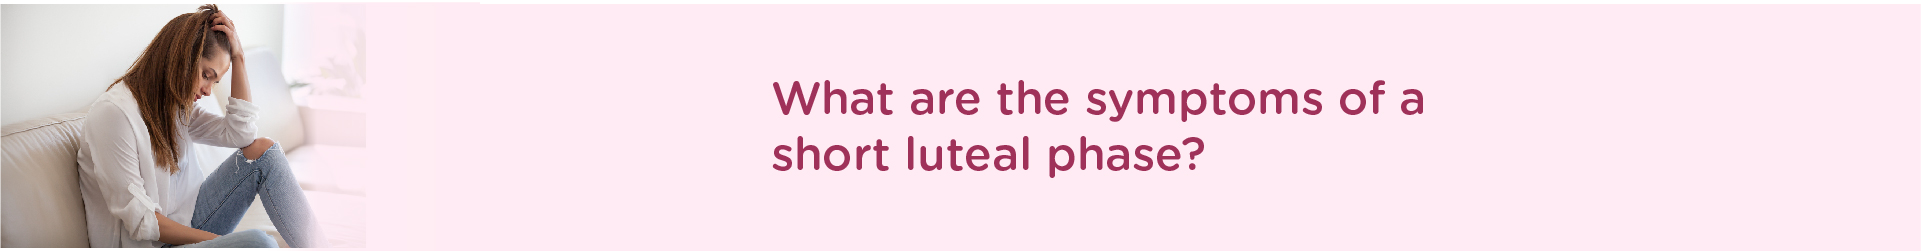 What are the Symptoms of a short luteal phase?